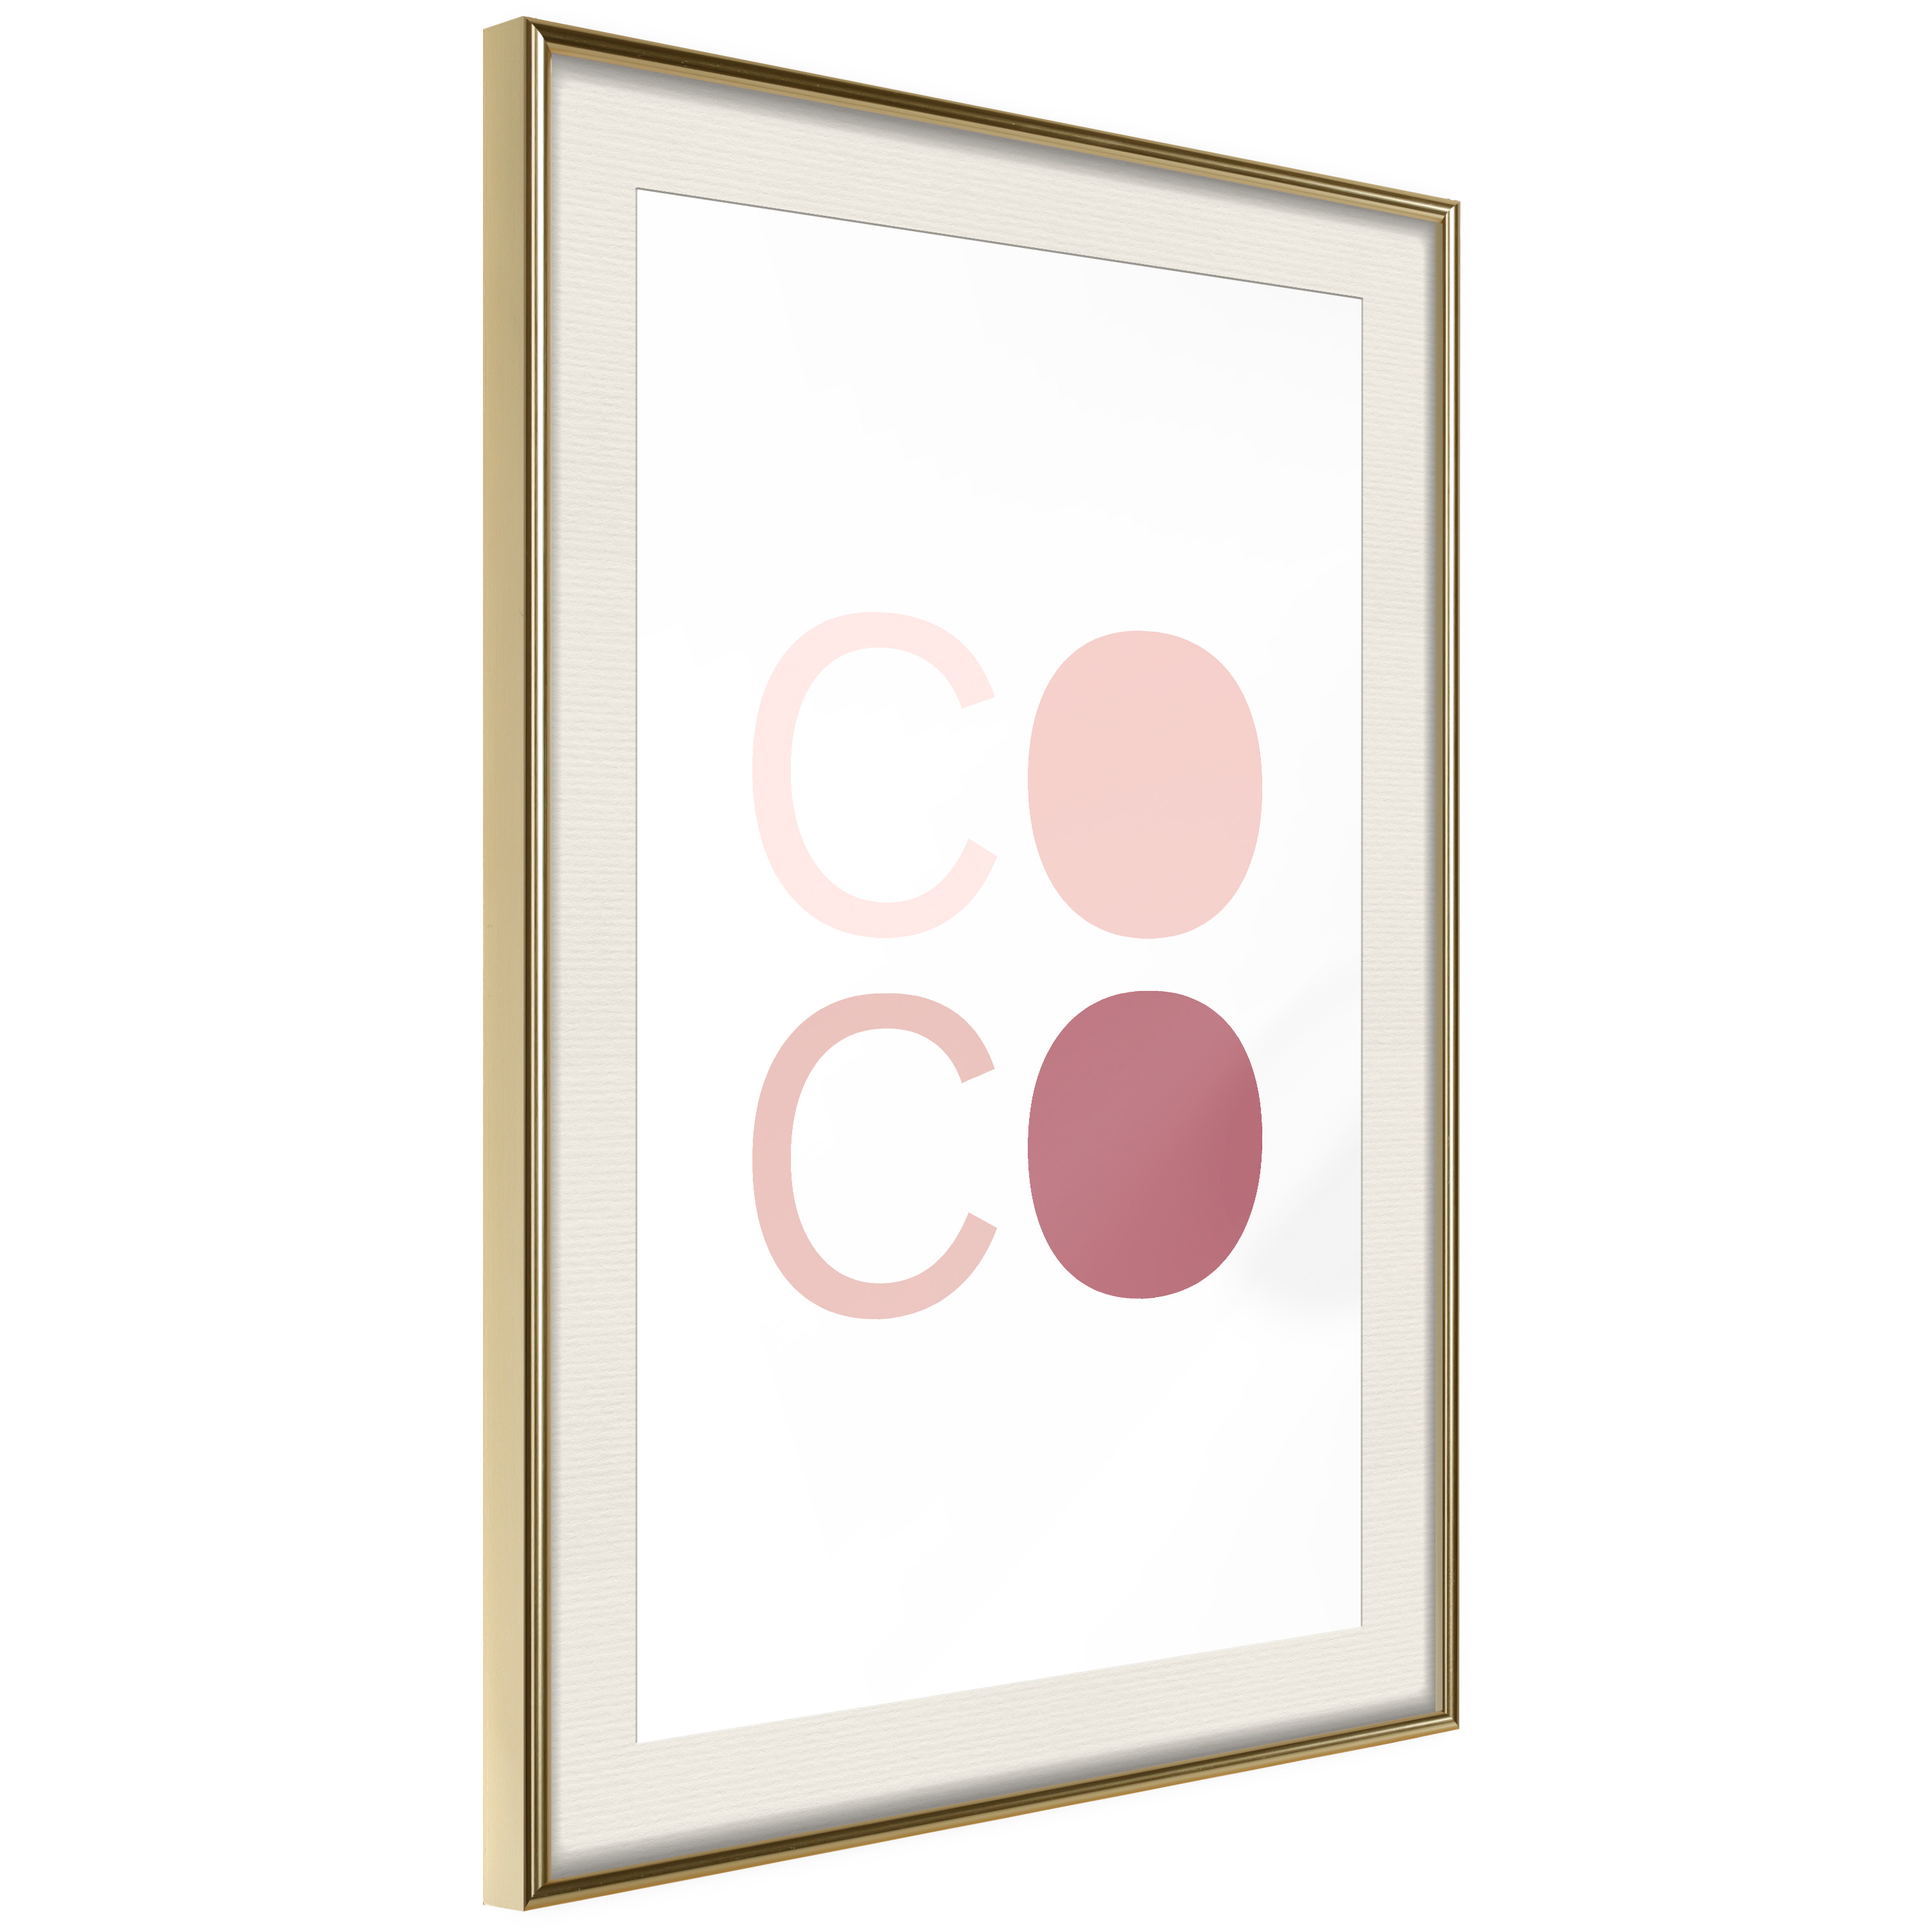 Poster - Different Shades of Coco - 40x60